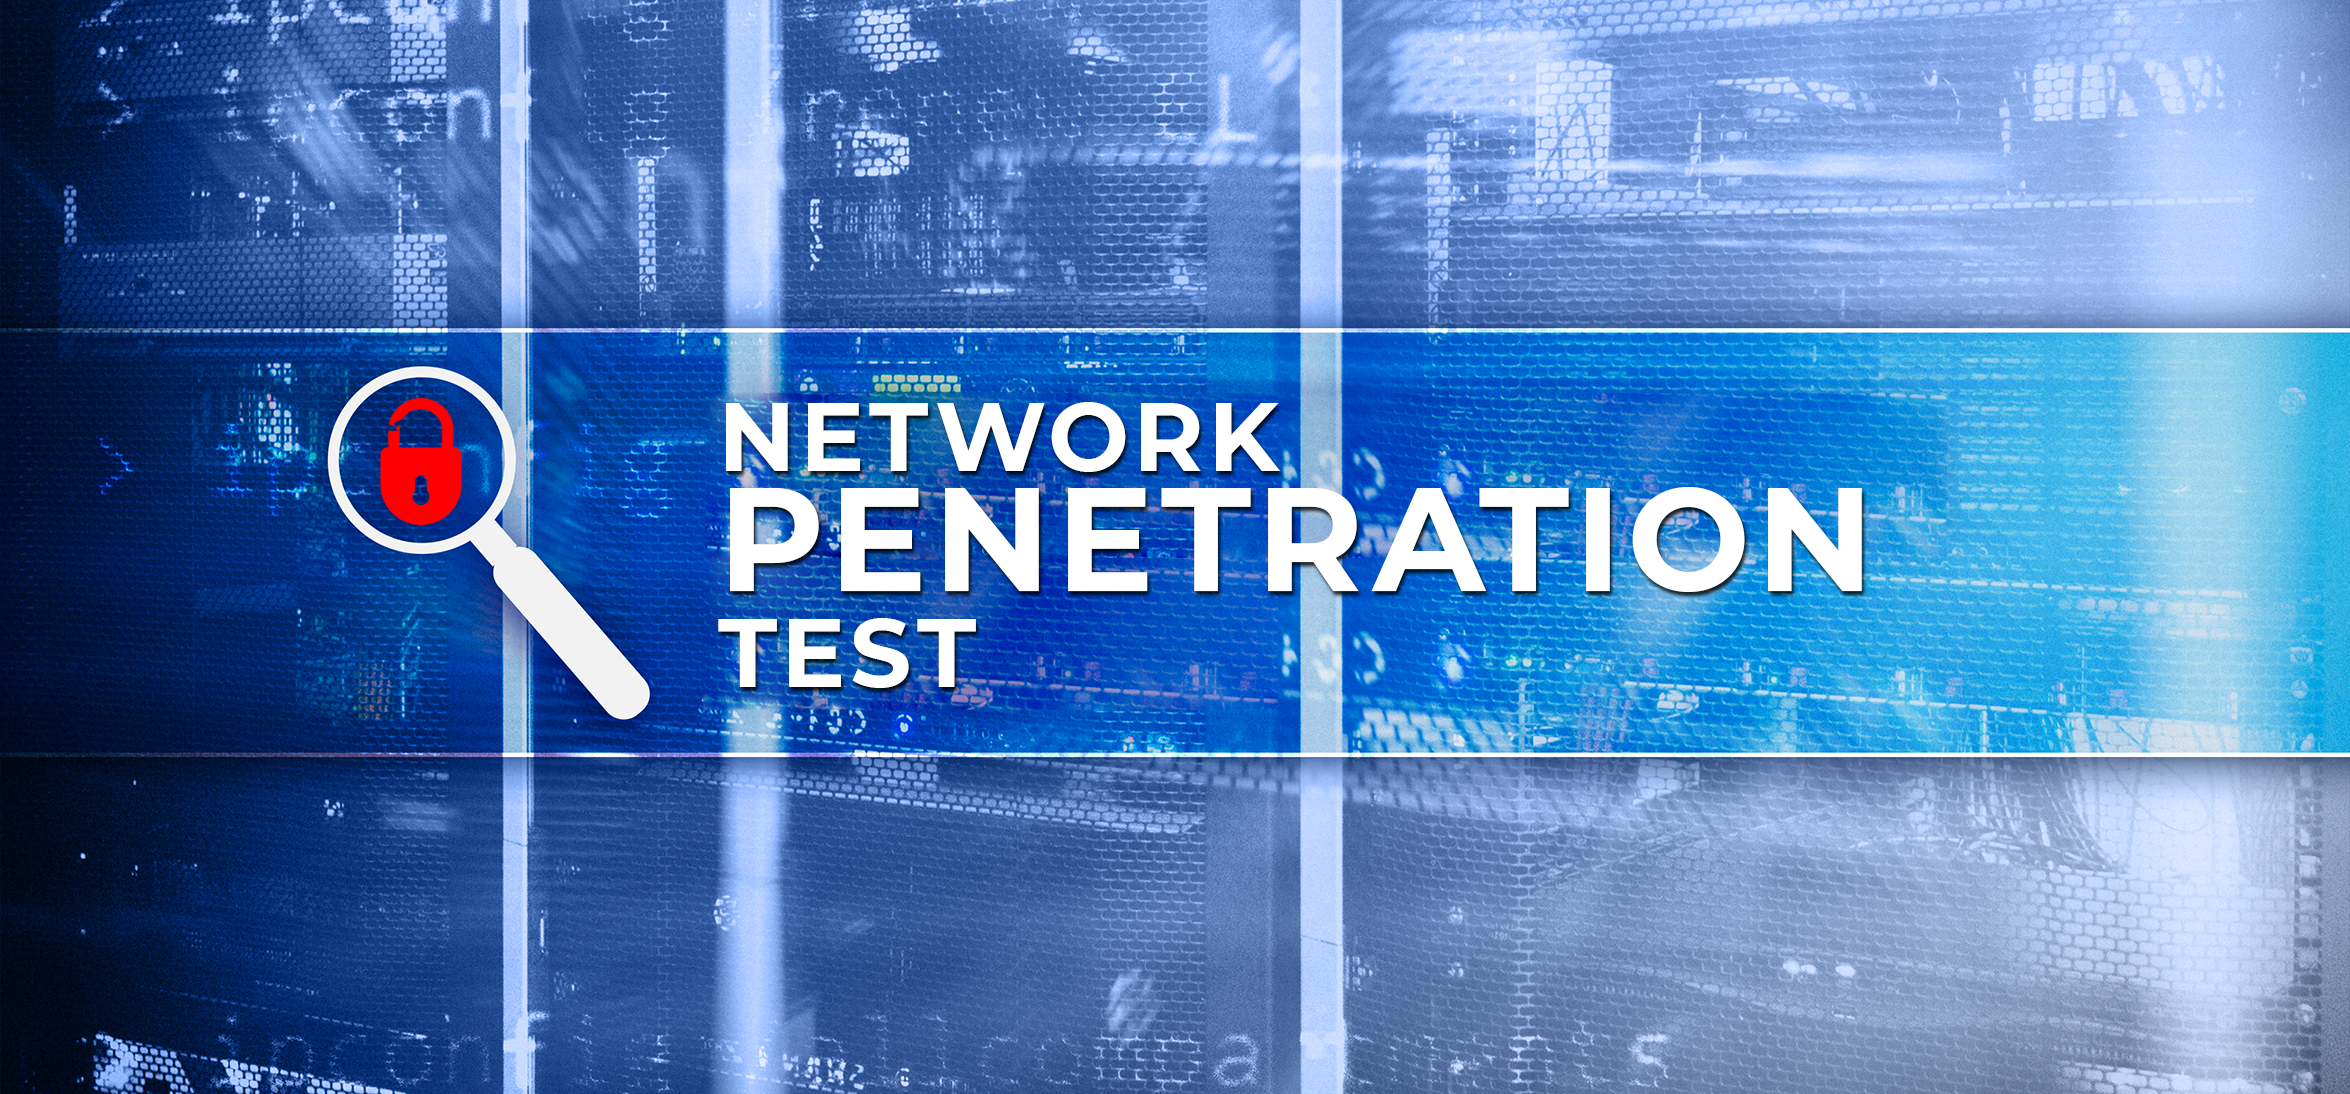 Penetration Testing Services in Newton NJ, 07860